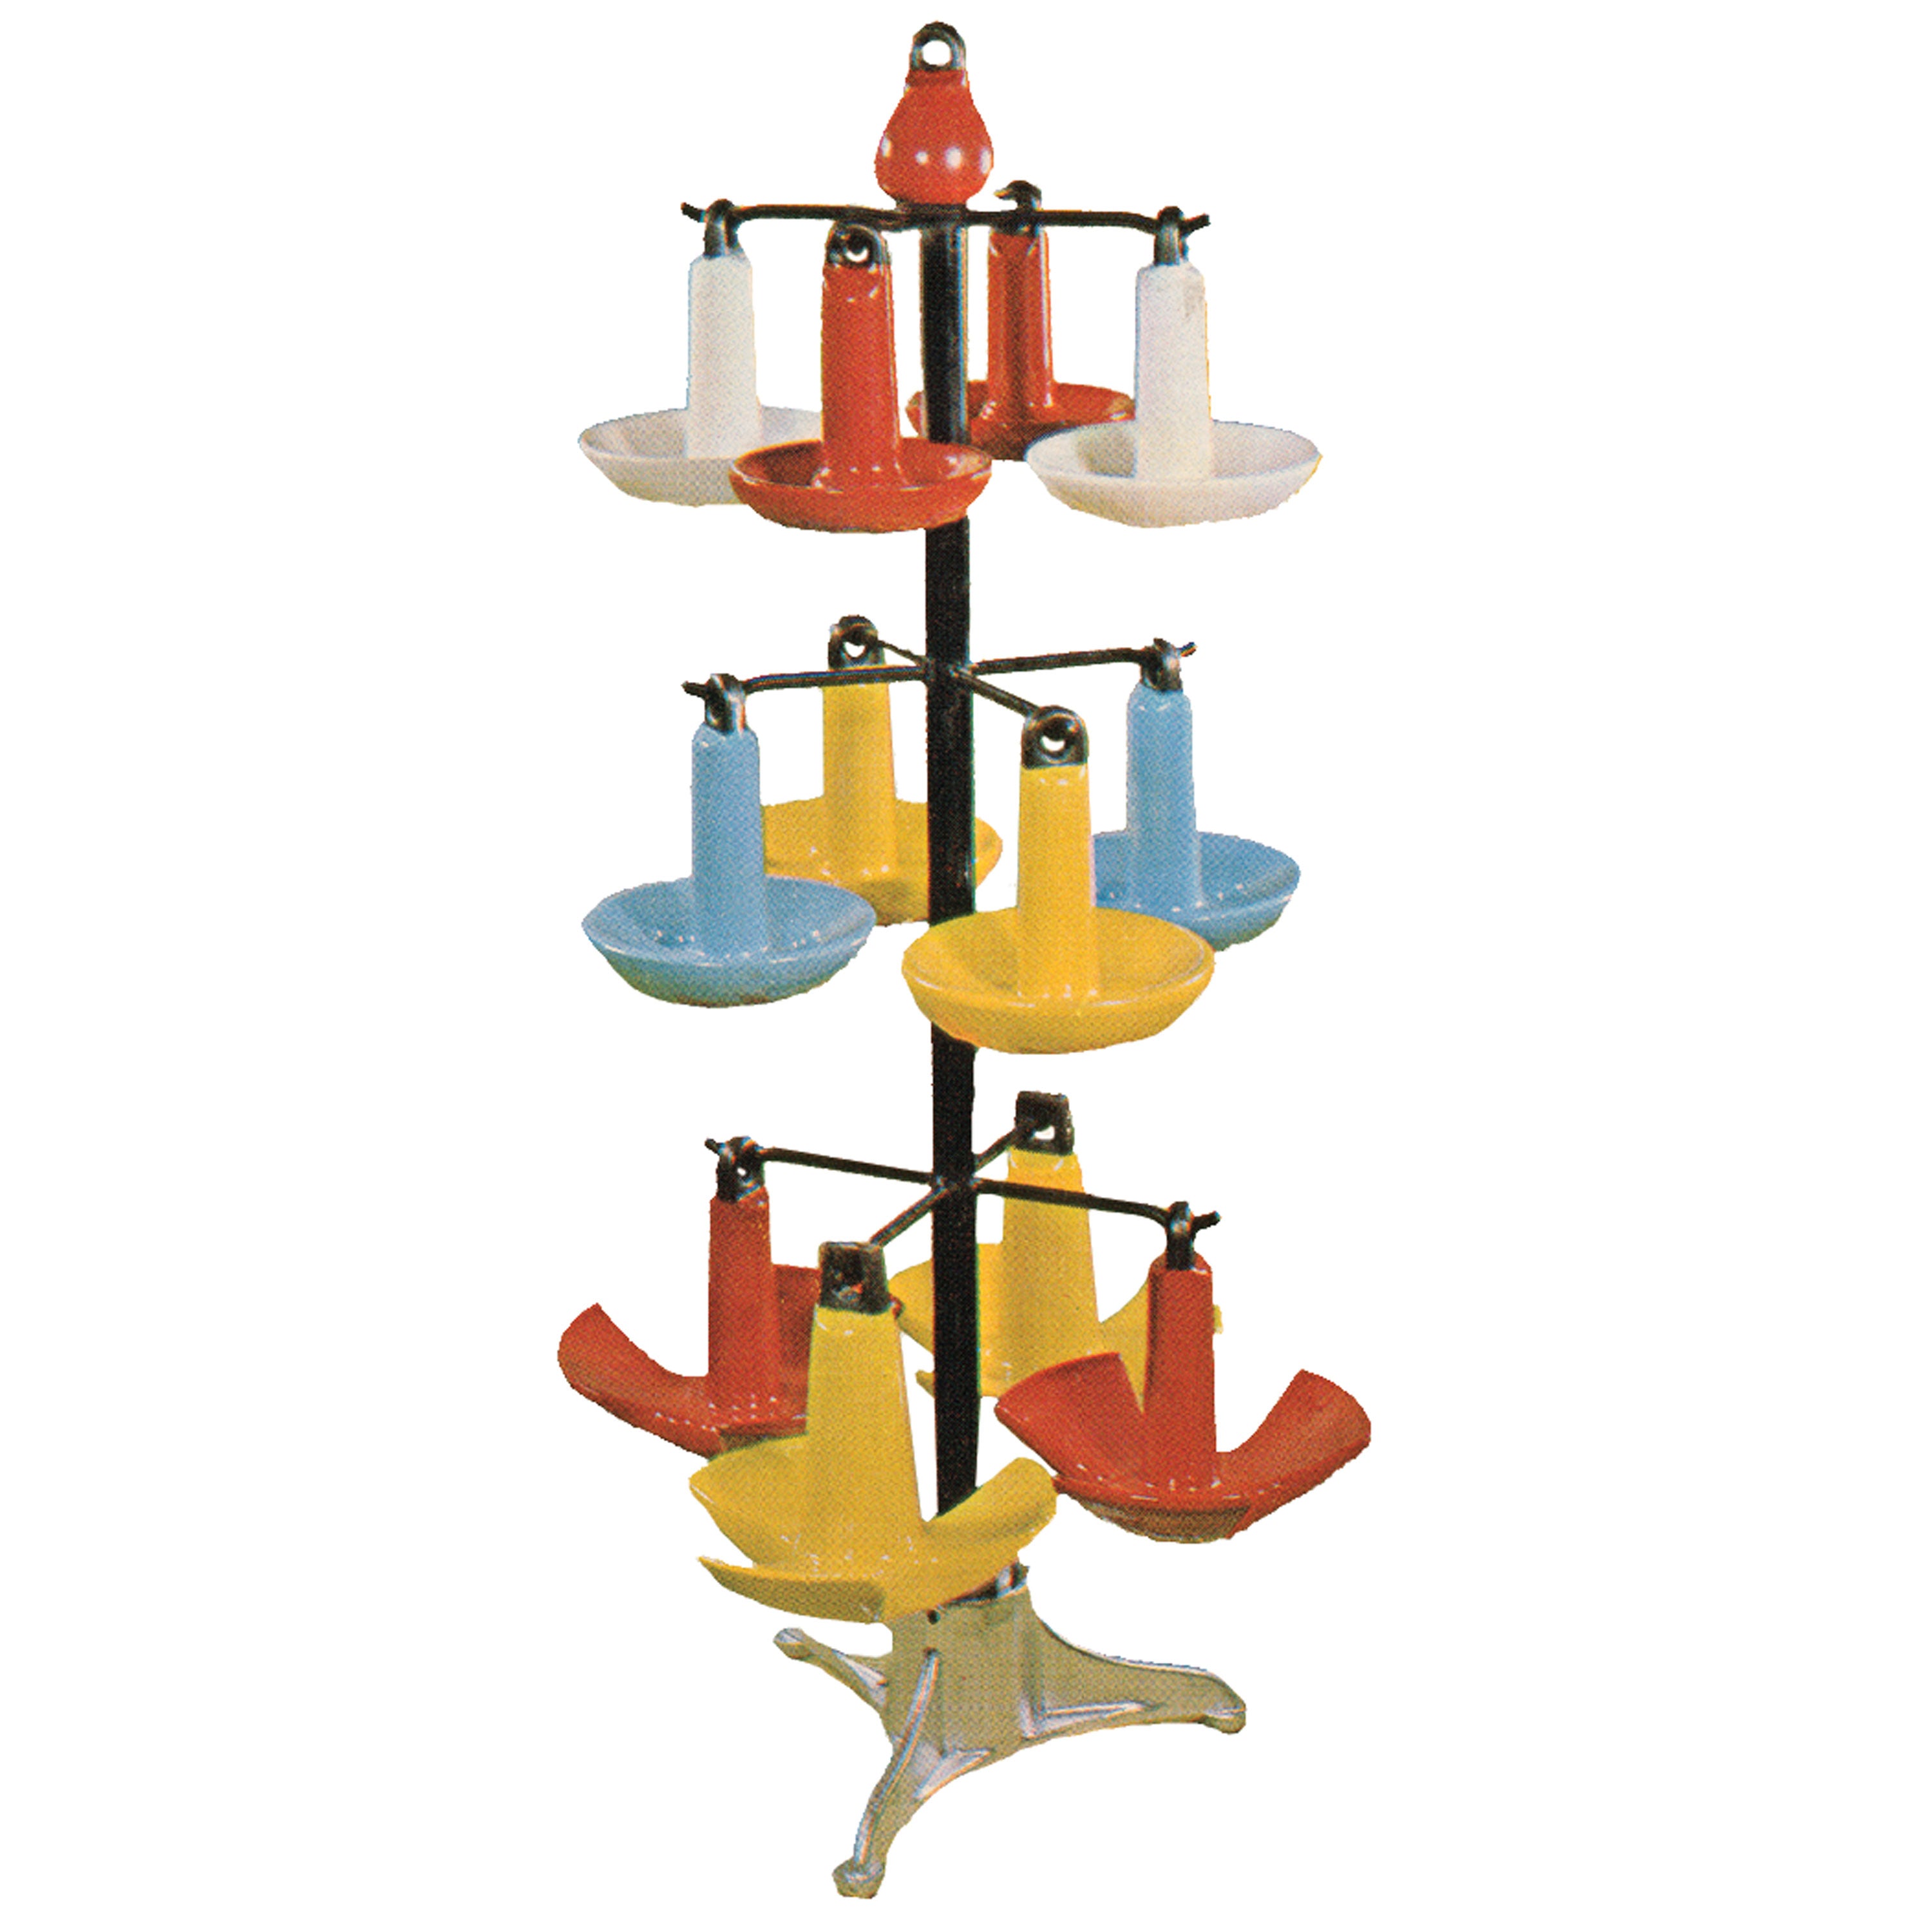 Roloff D S 20-44 Roloff Anchor Display Stand